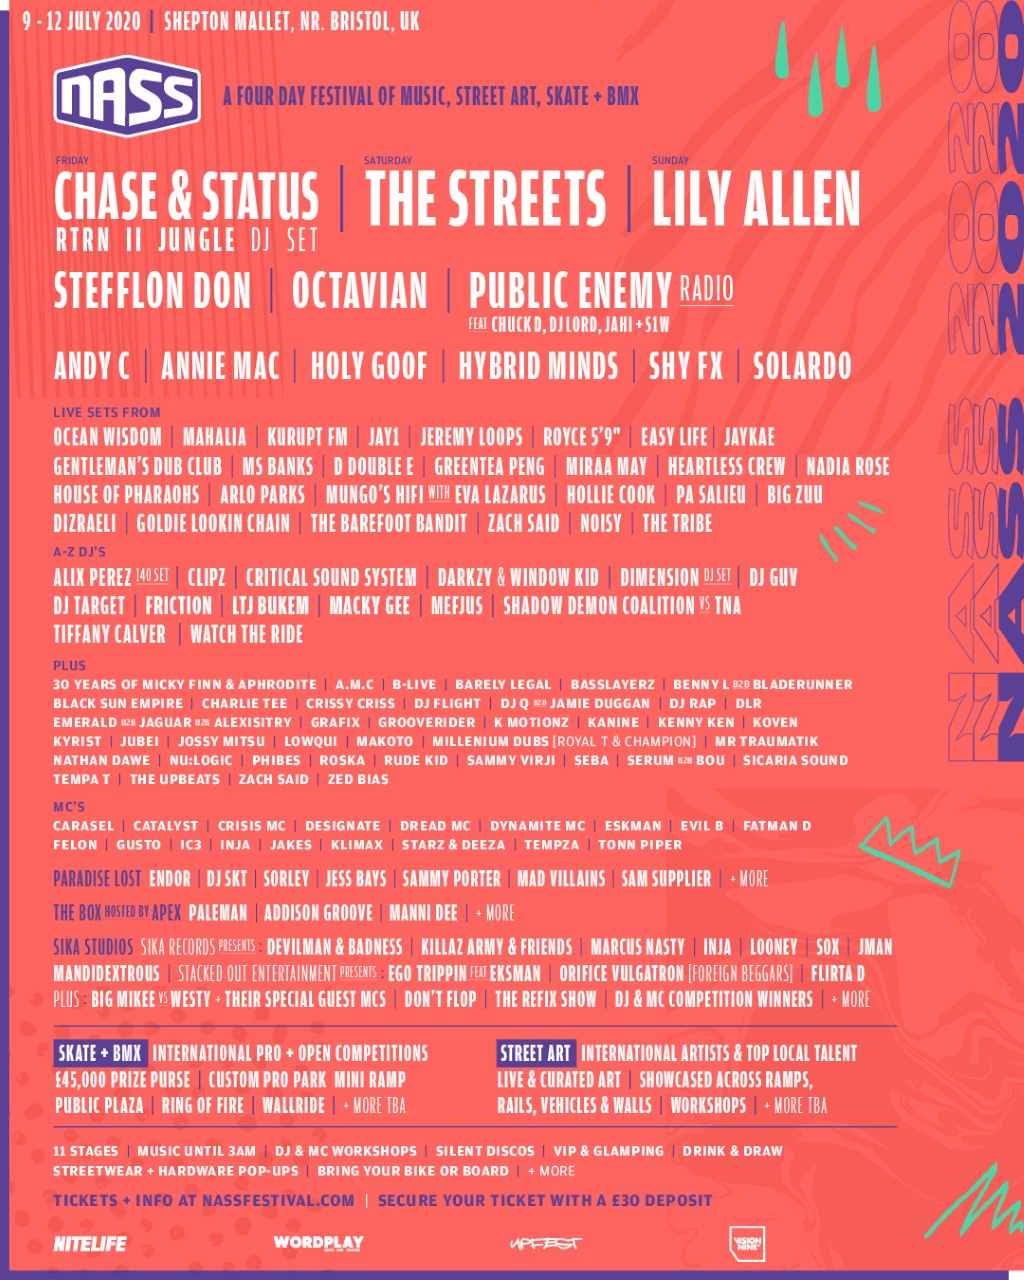 Nass announces Sunday Headliner and more acts for 2020